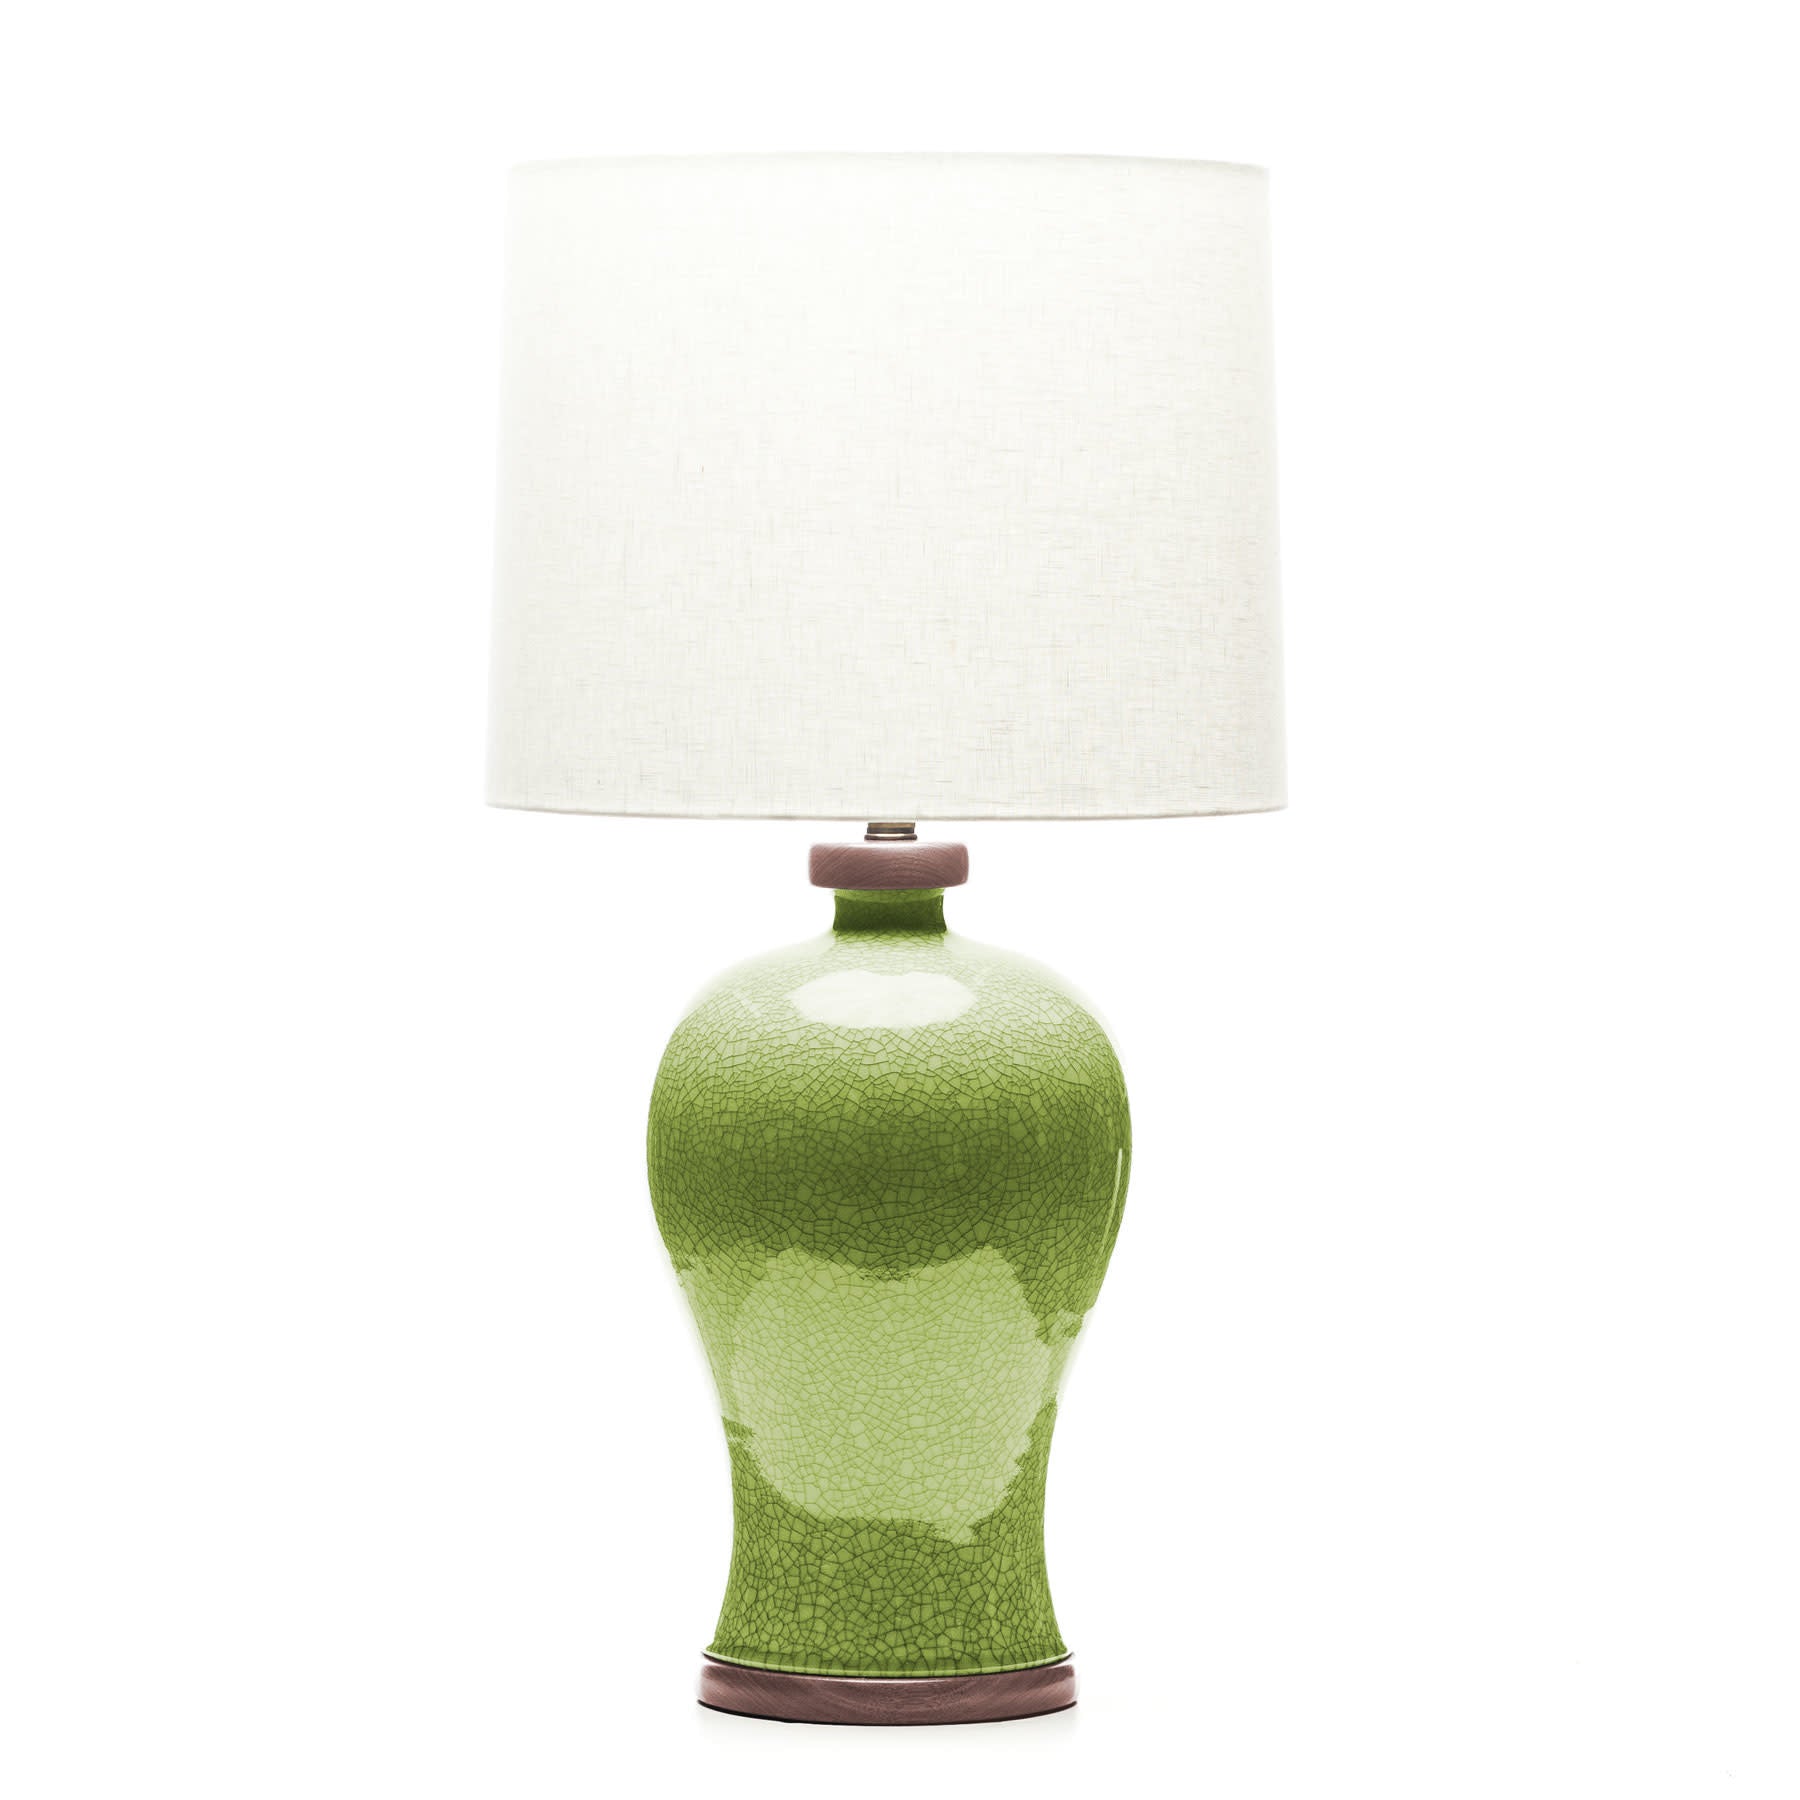 Lawrence & Scott Dashiell Table Lamp in Celadon Crackle with Sapele Base